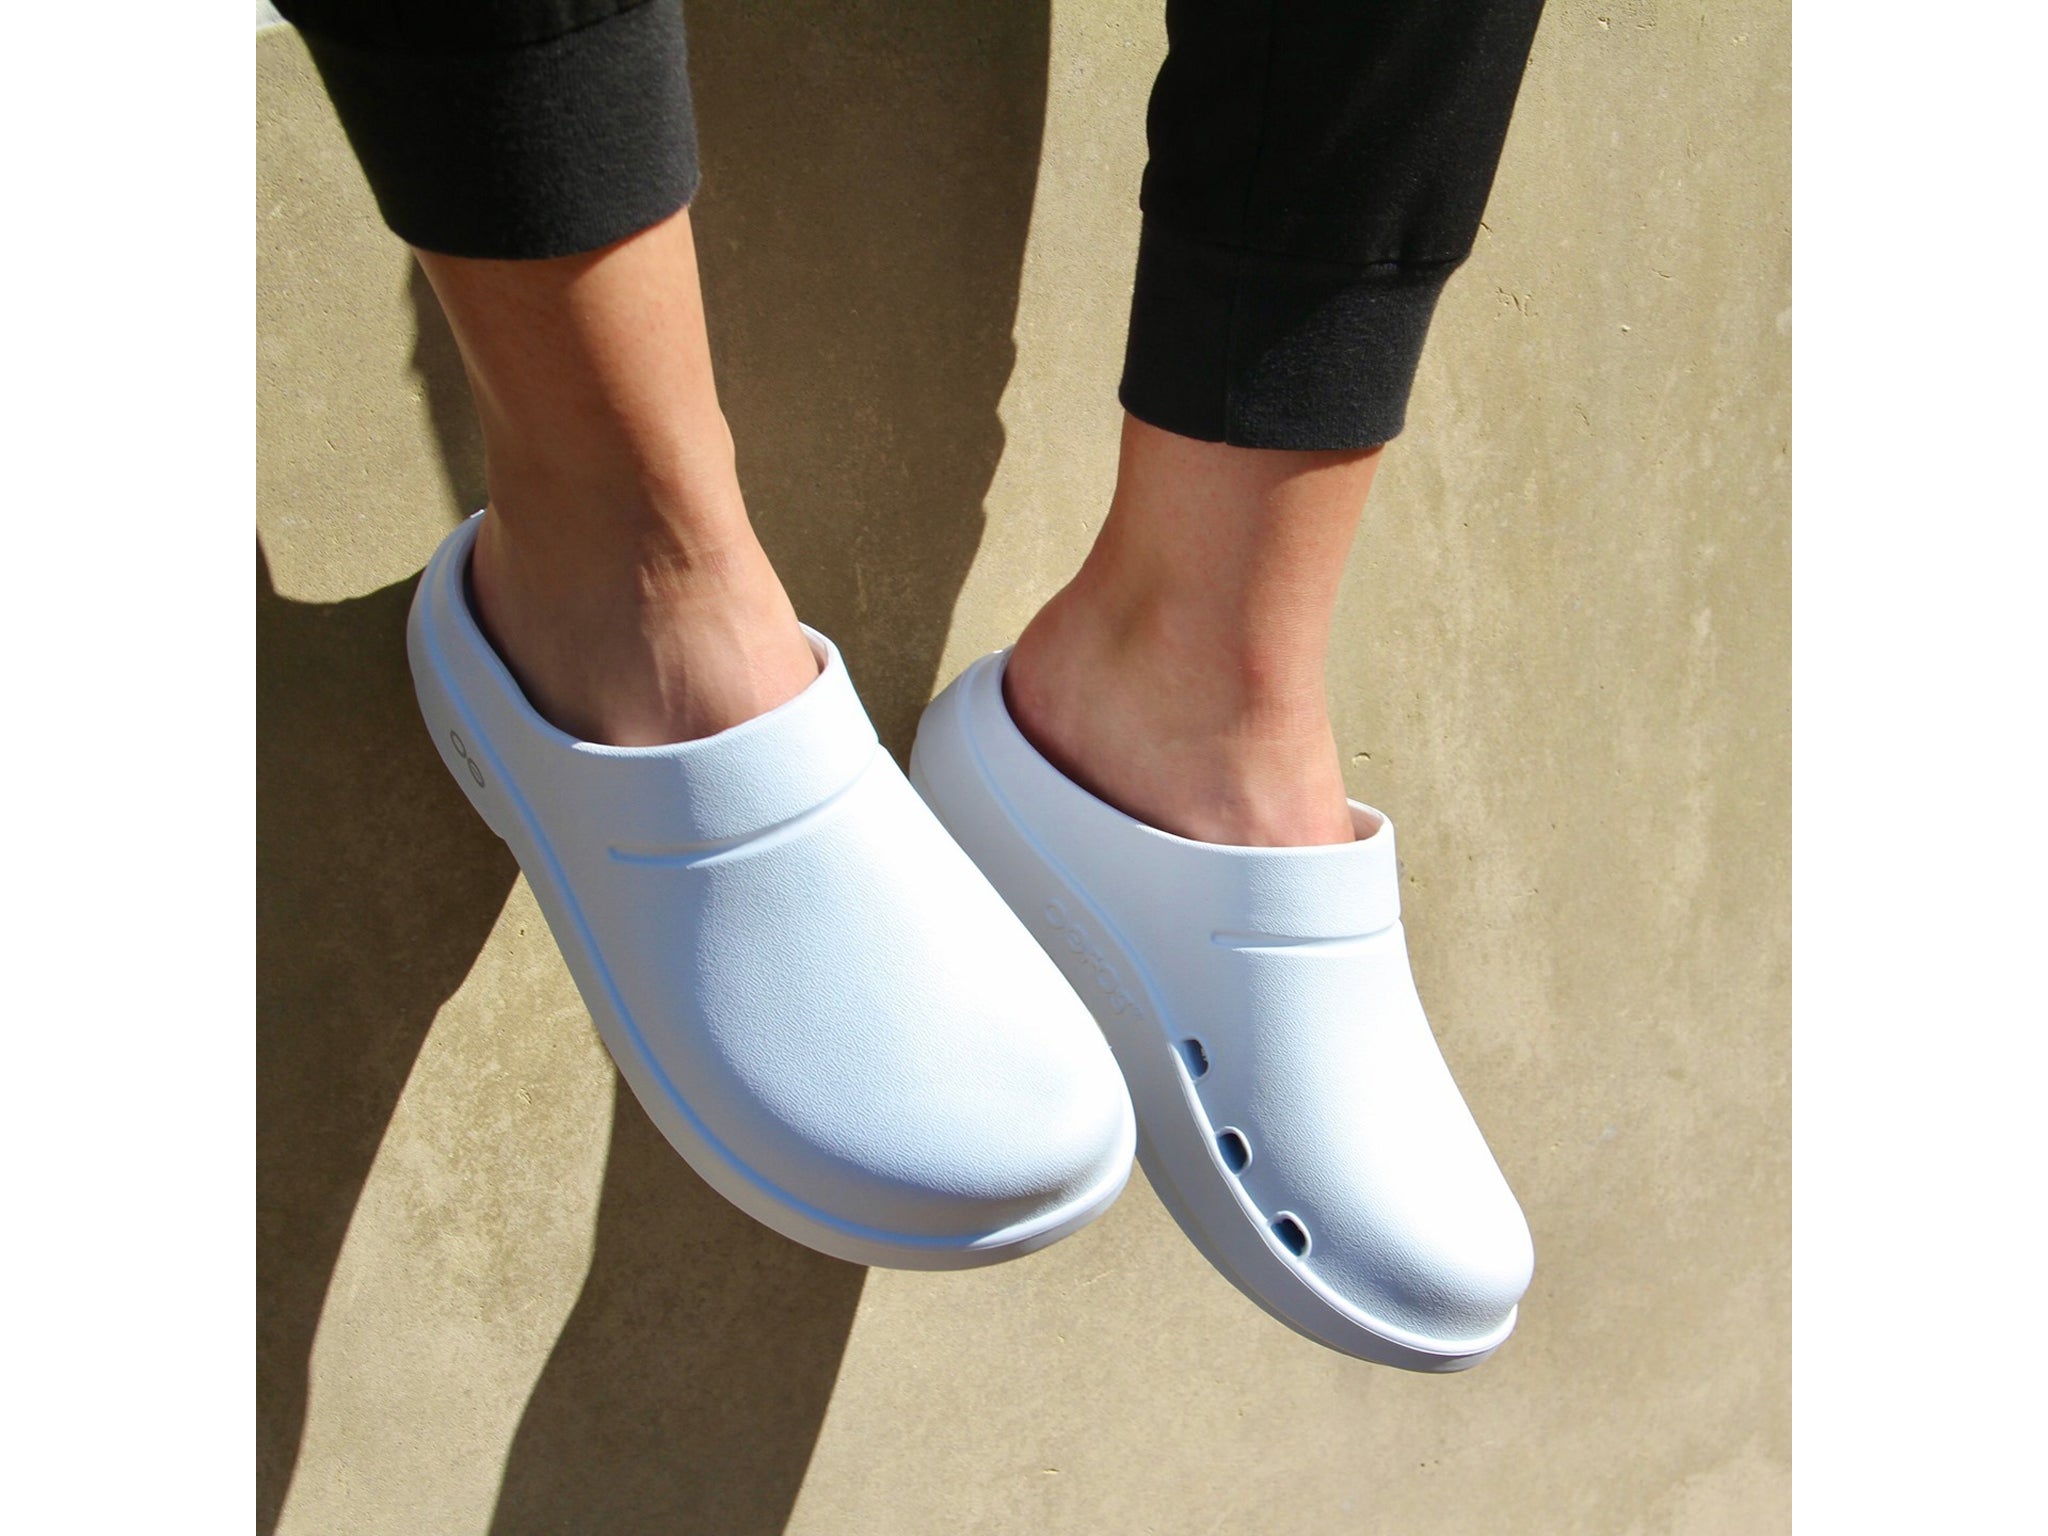 Women's Shoes Slipper Trainers Low Shoes Ballerina Water Shoes 